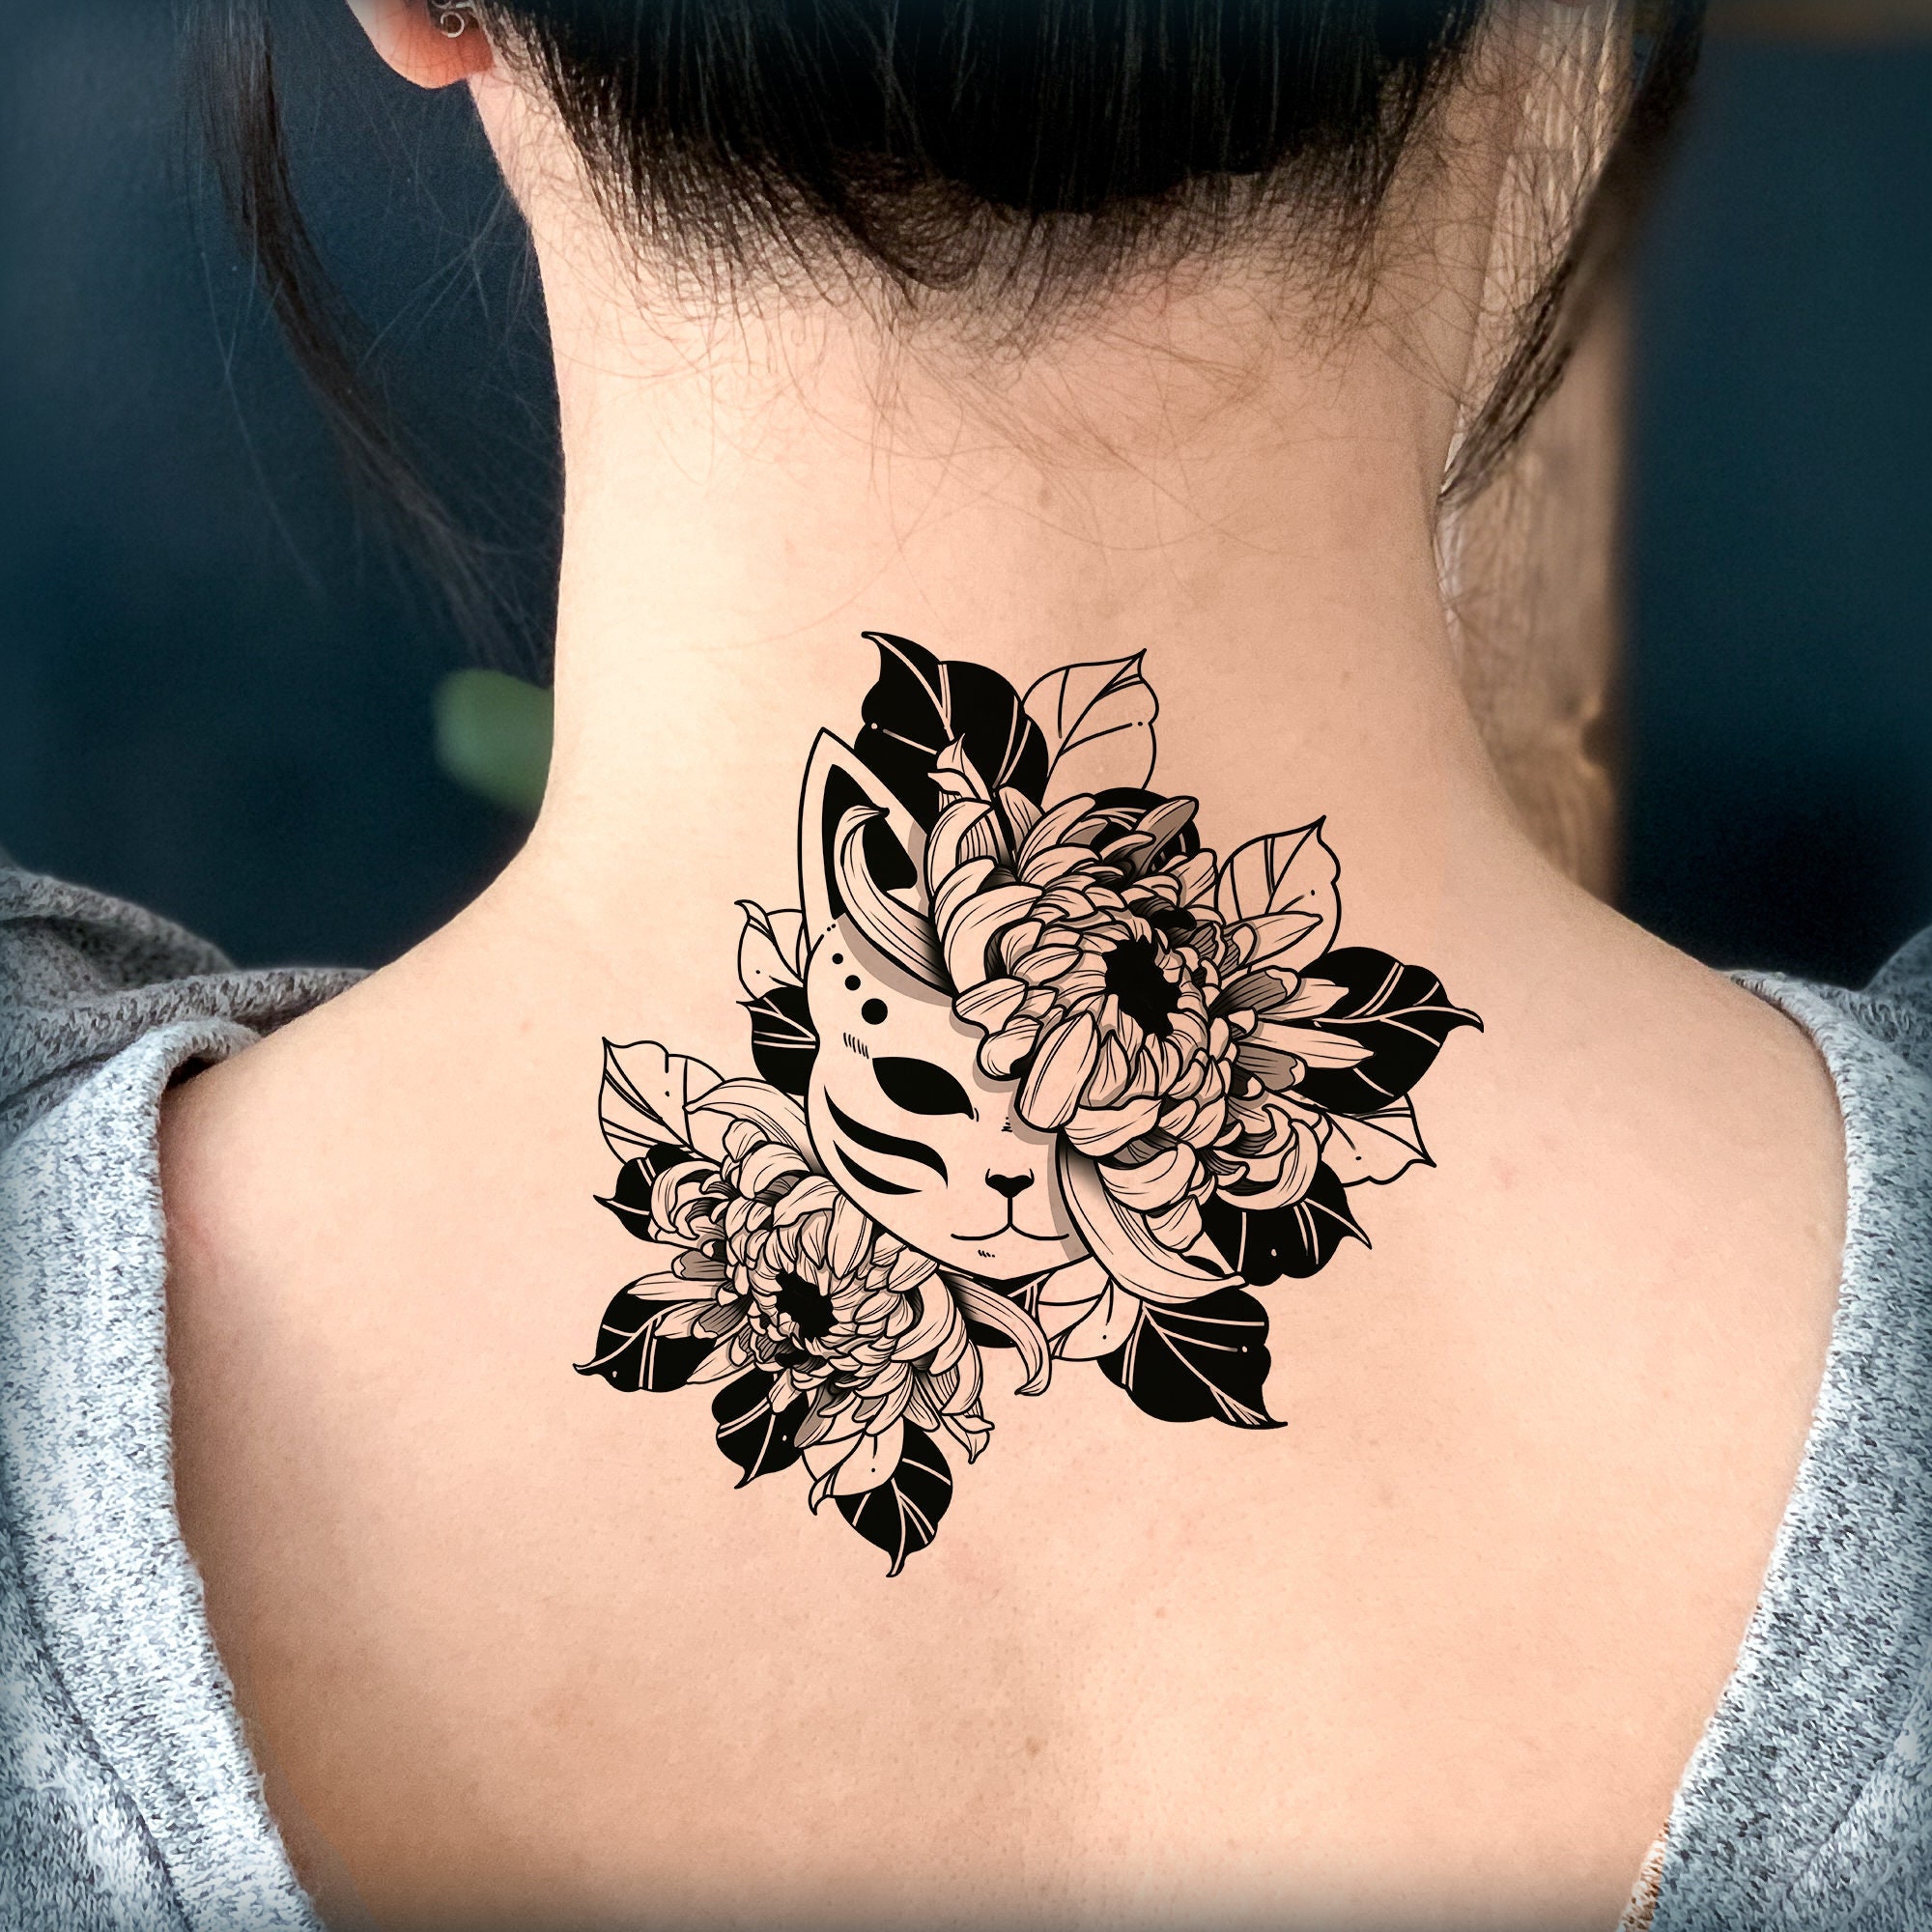 Does anyone know the meaning of this tattoo? : r/TattooDesigns